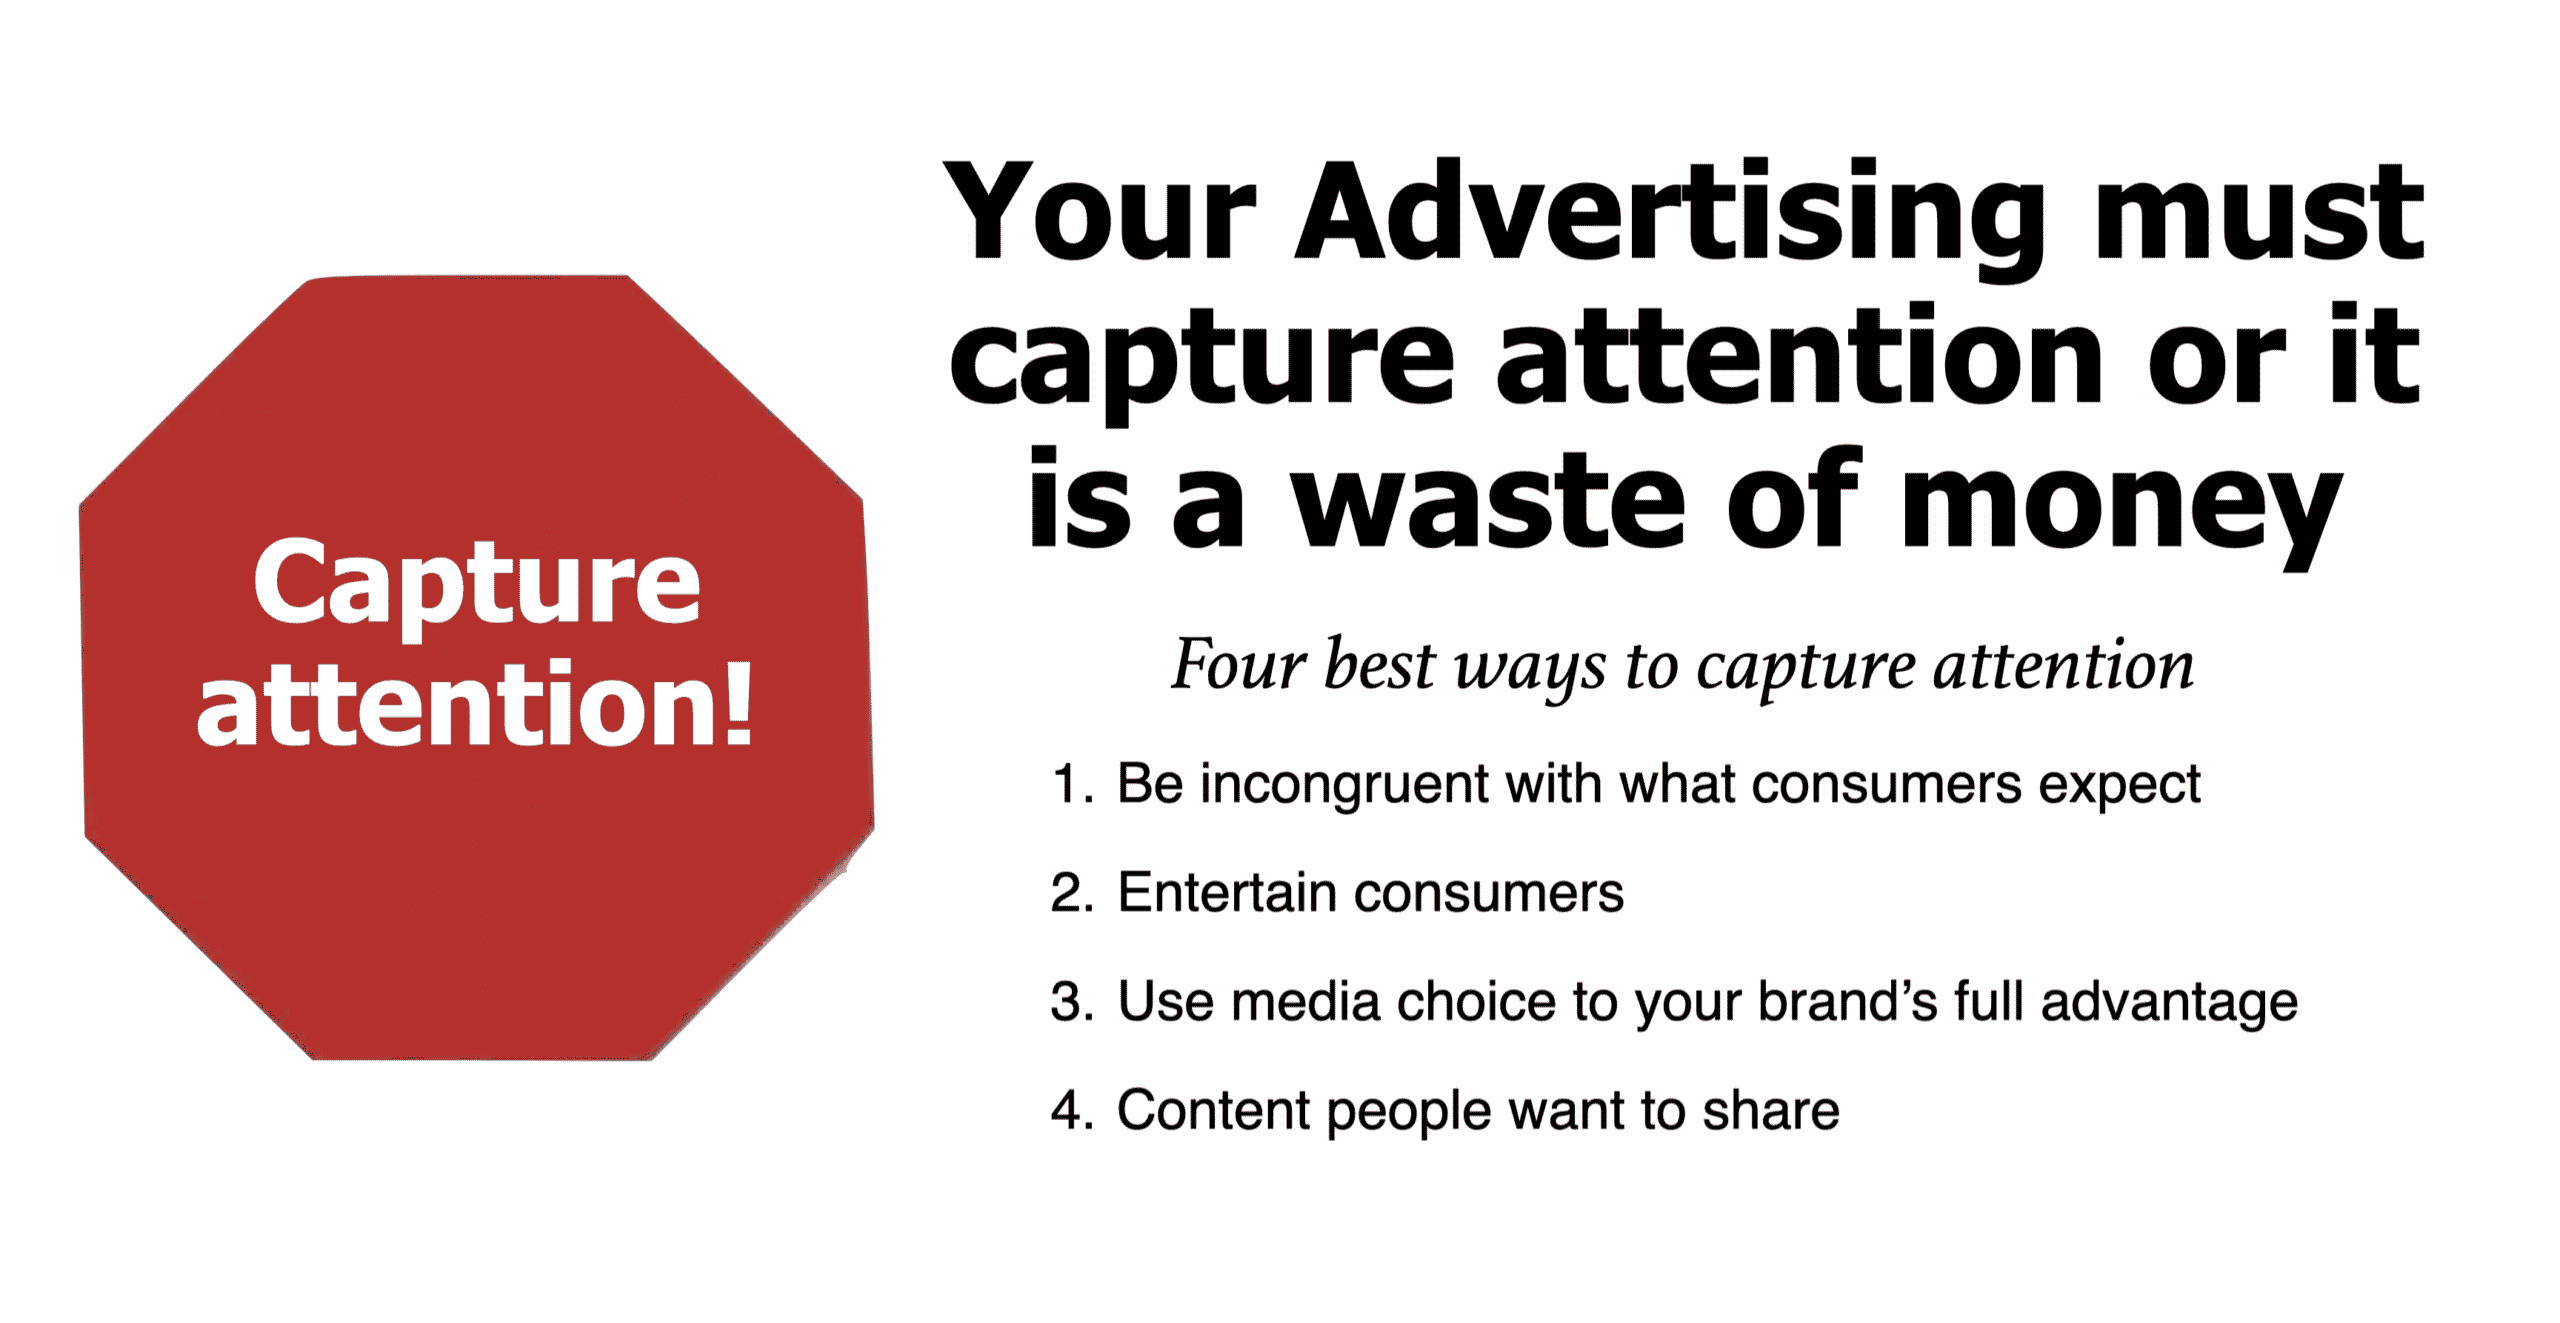 Attention-getting advertising